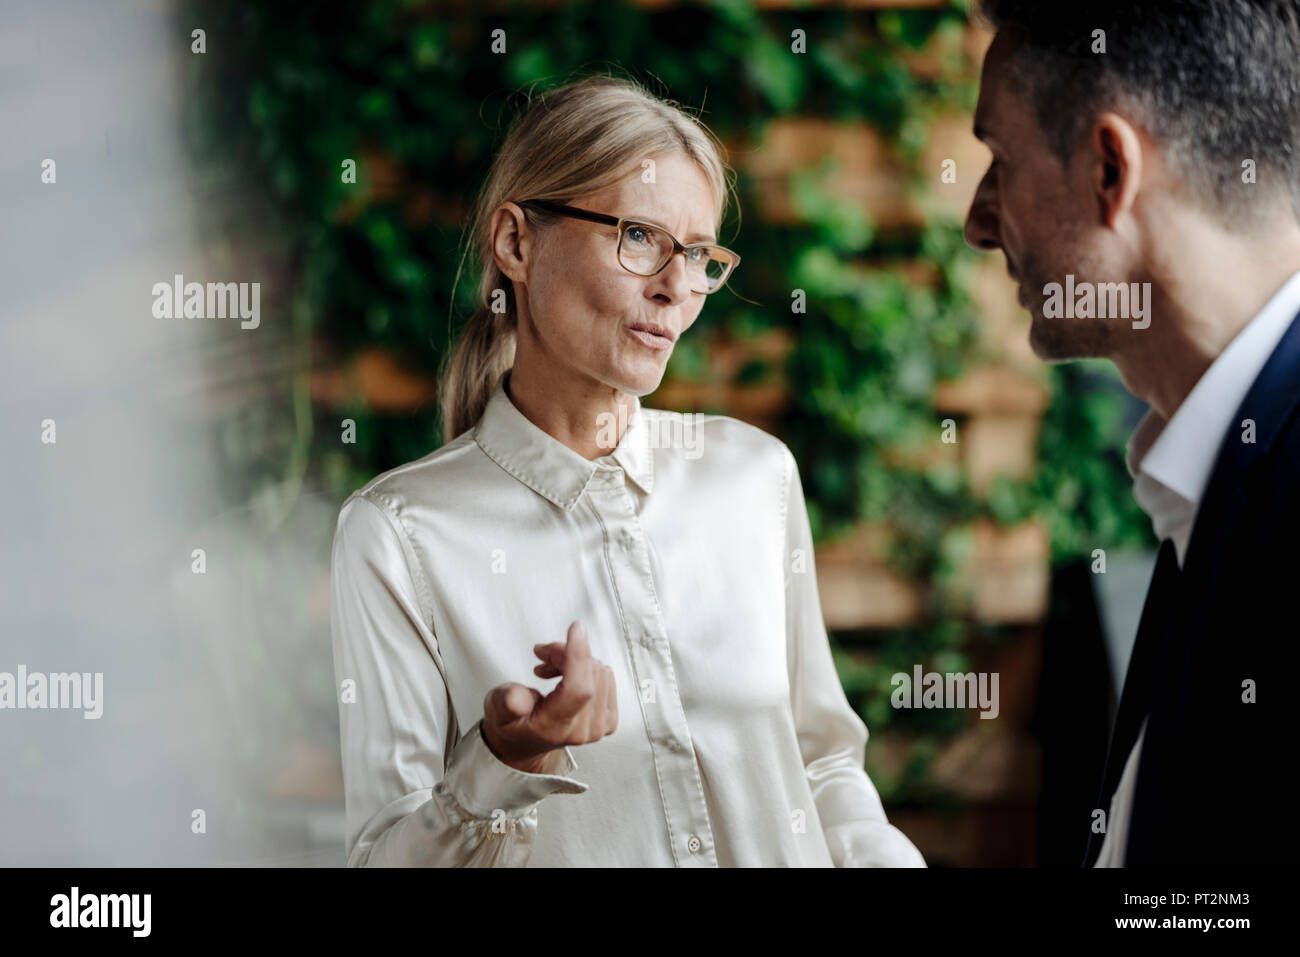 Businessman and businesswoman talking Stock Photo